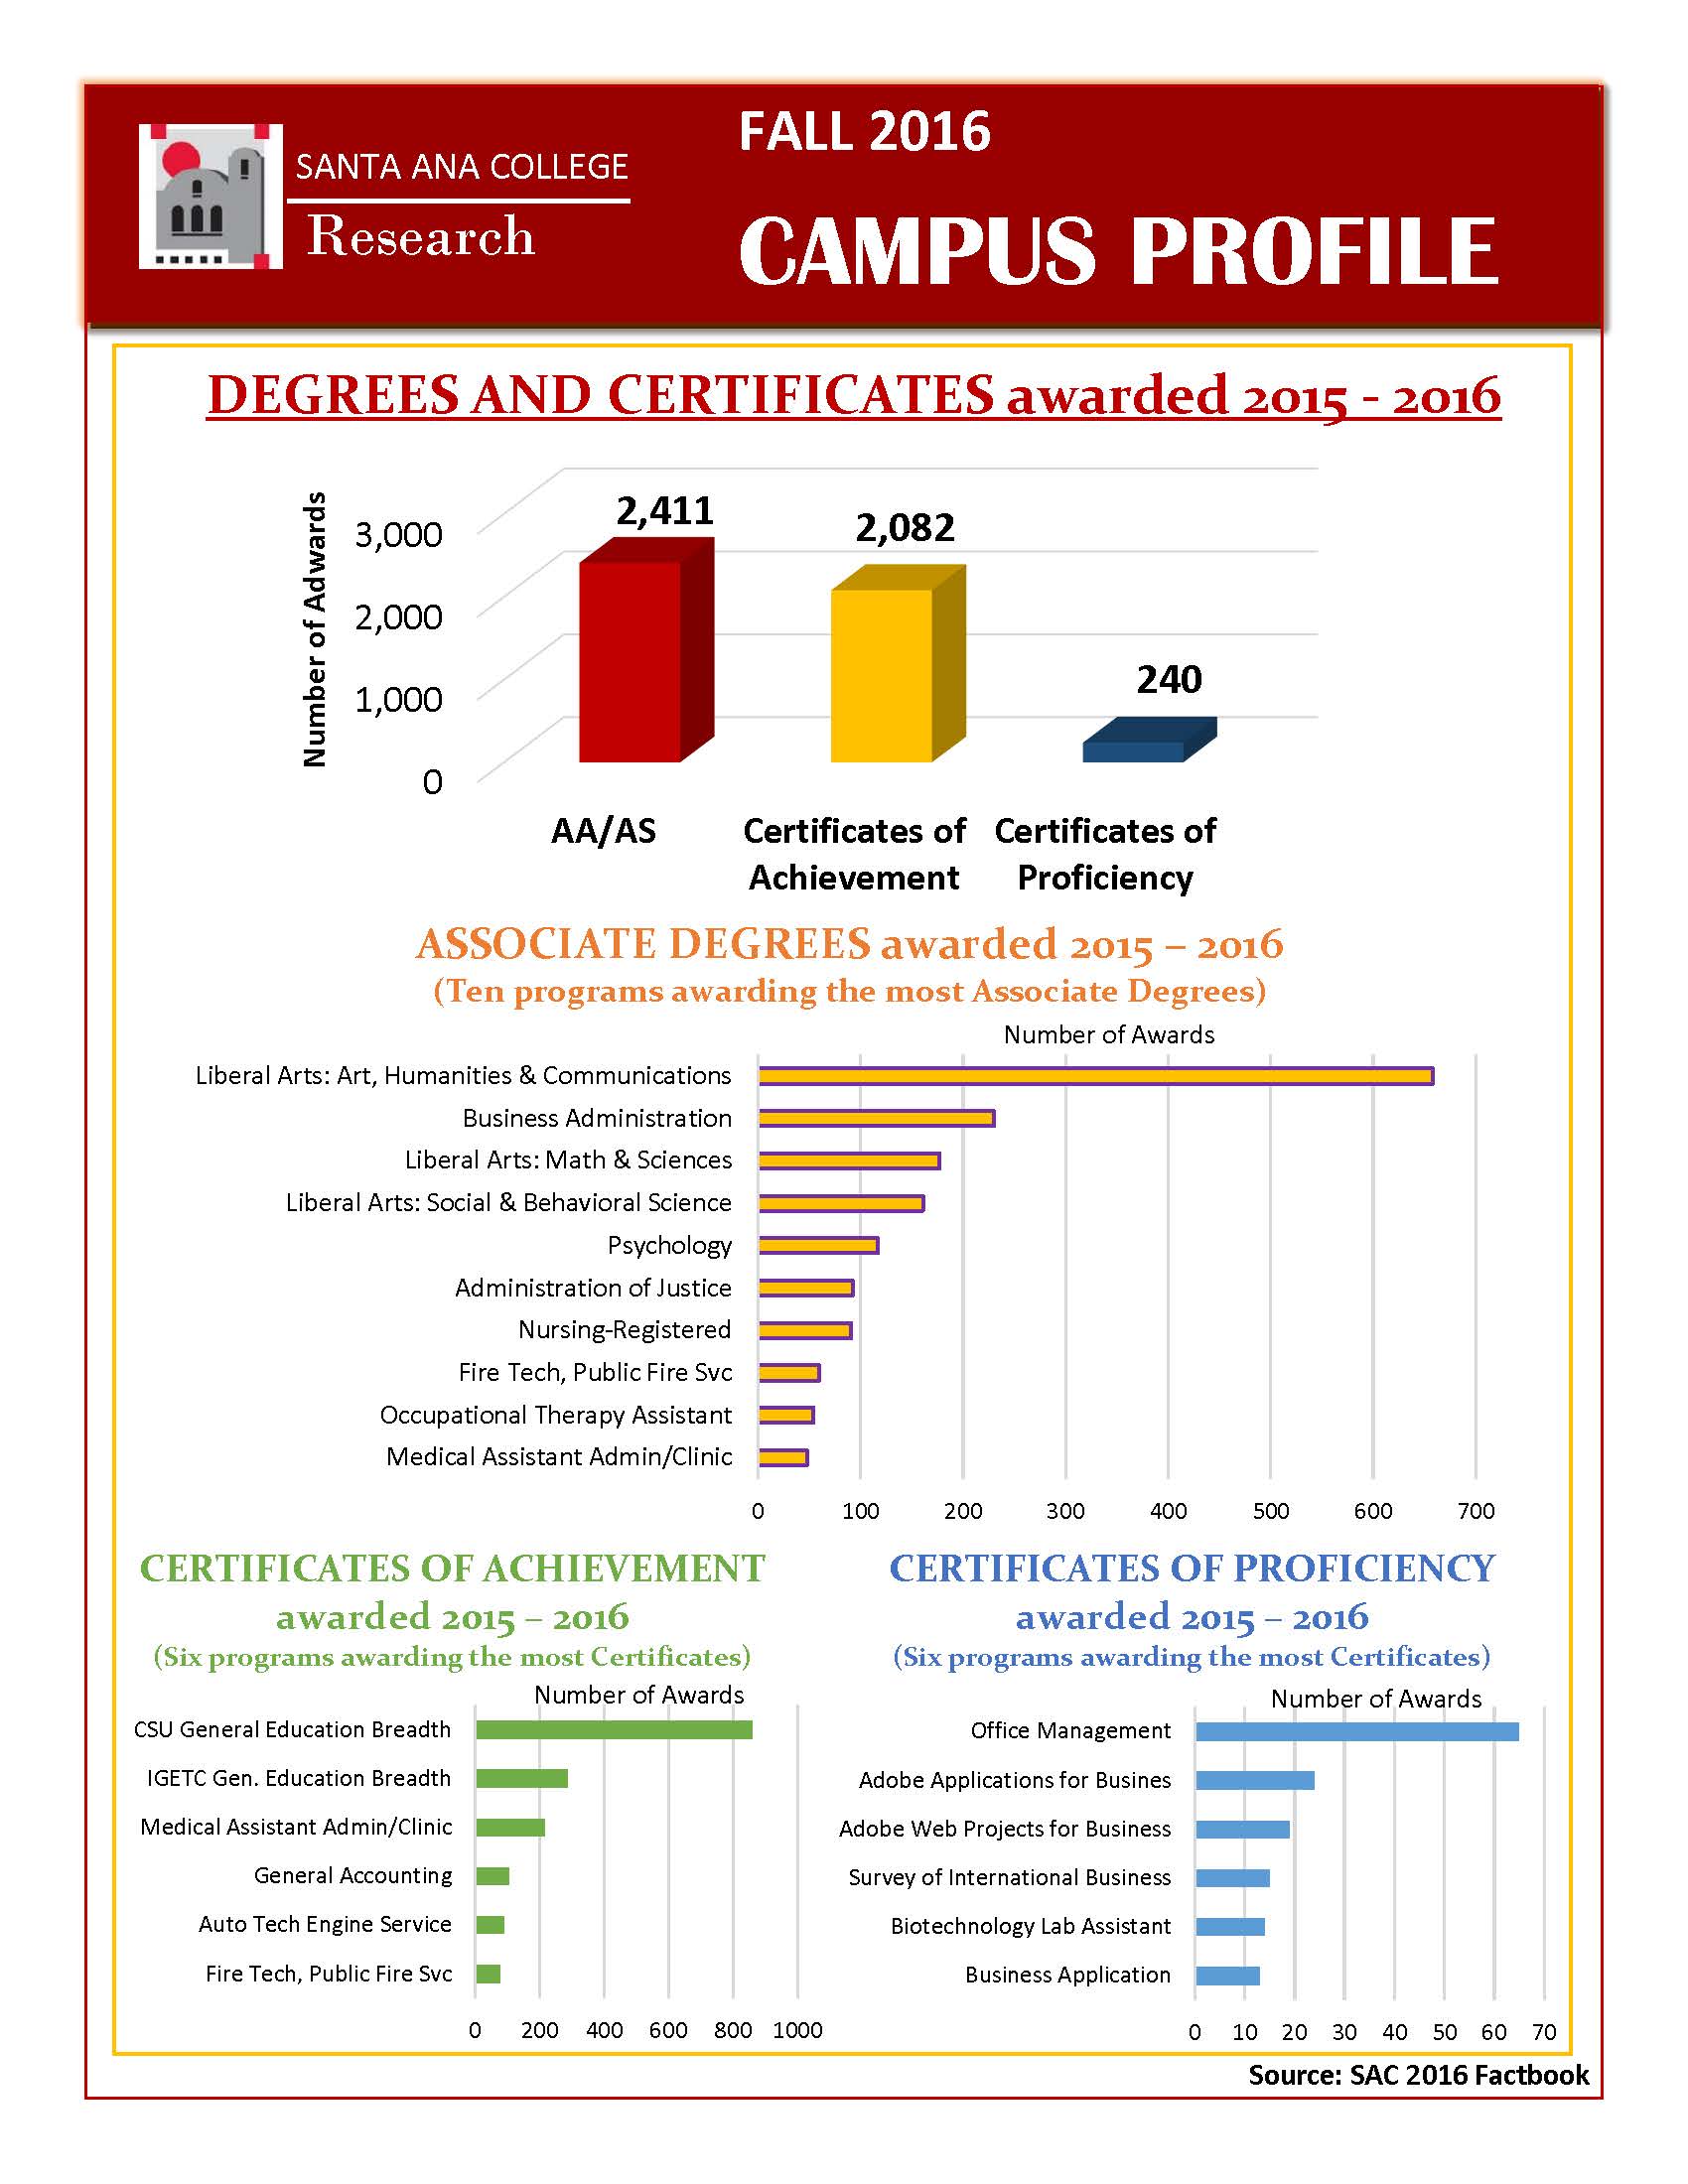 Campus Profile_2016 edited  non credit is annual count_Page_2.jpg